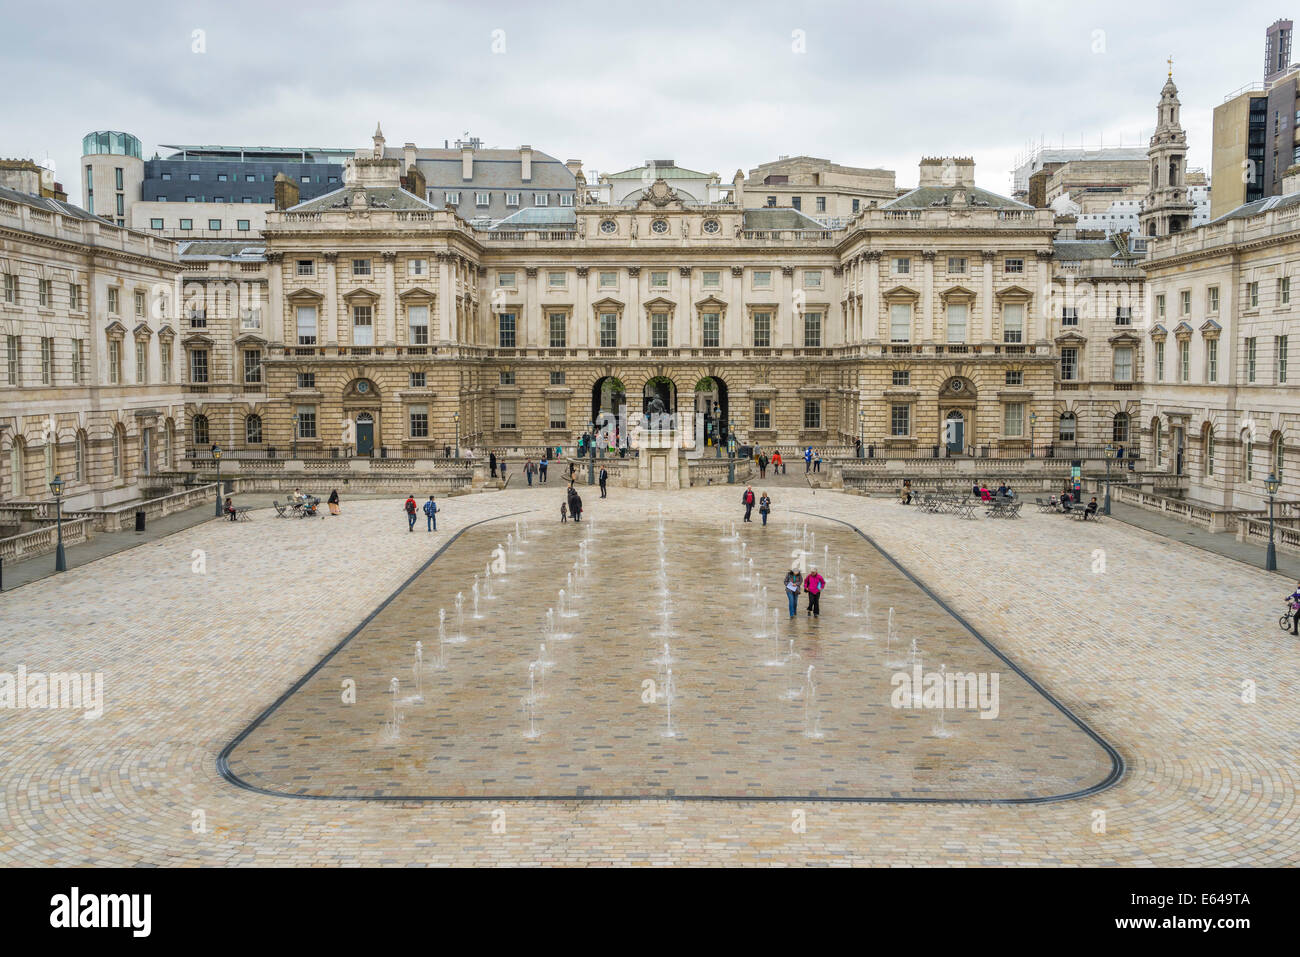 Fountains in the courtyard of Somerset House, London, UK Stock Photo